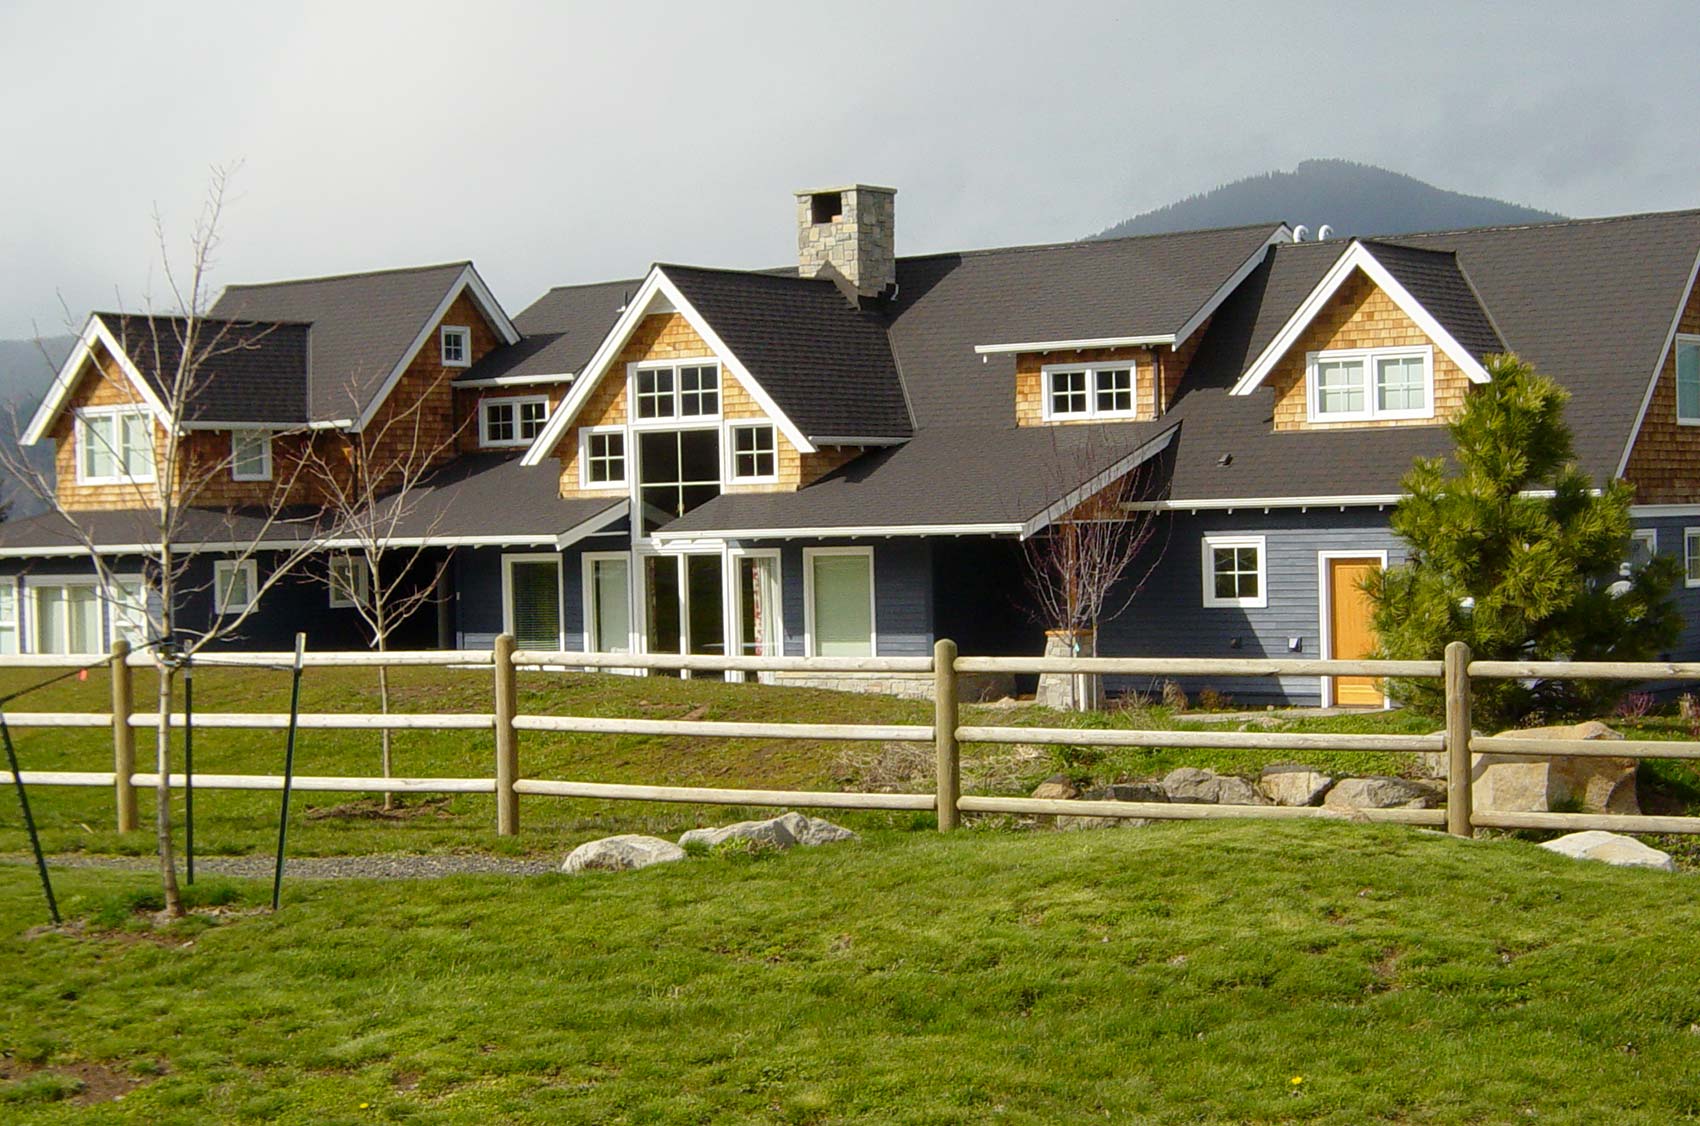 Craftsman style home in the Columbia River Gorge built by Huberd Design